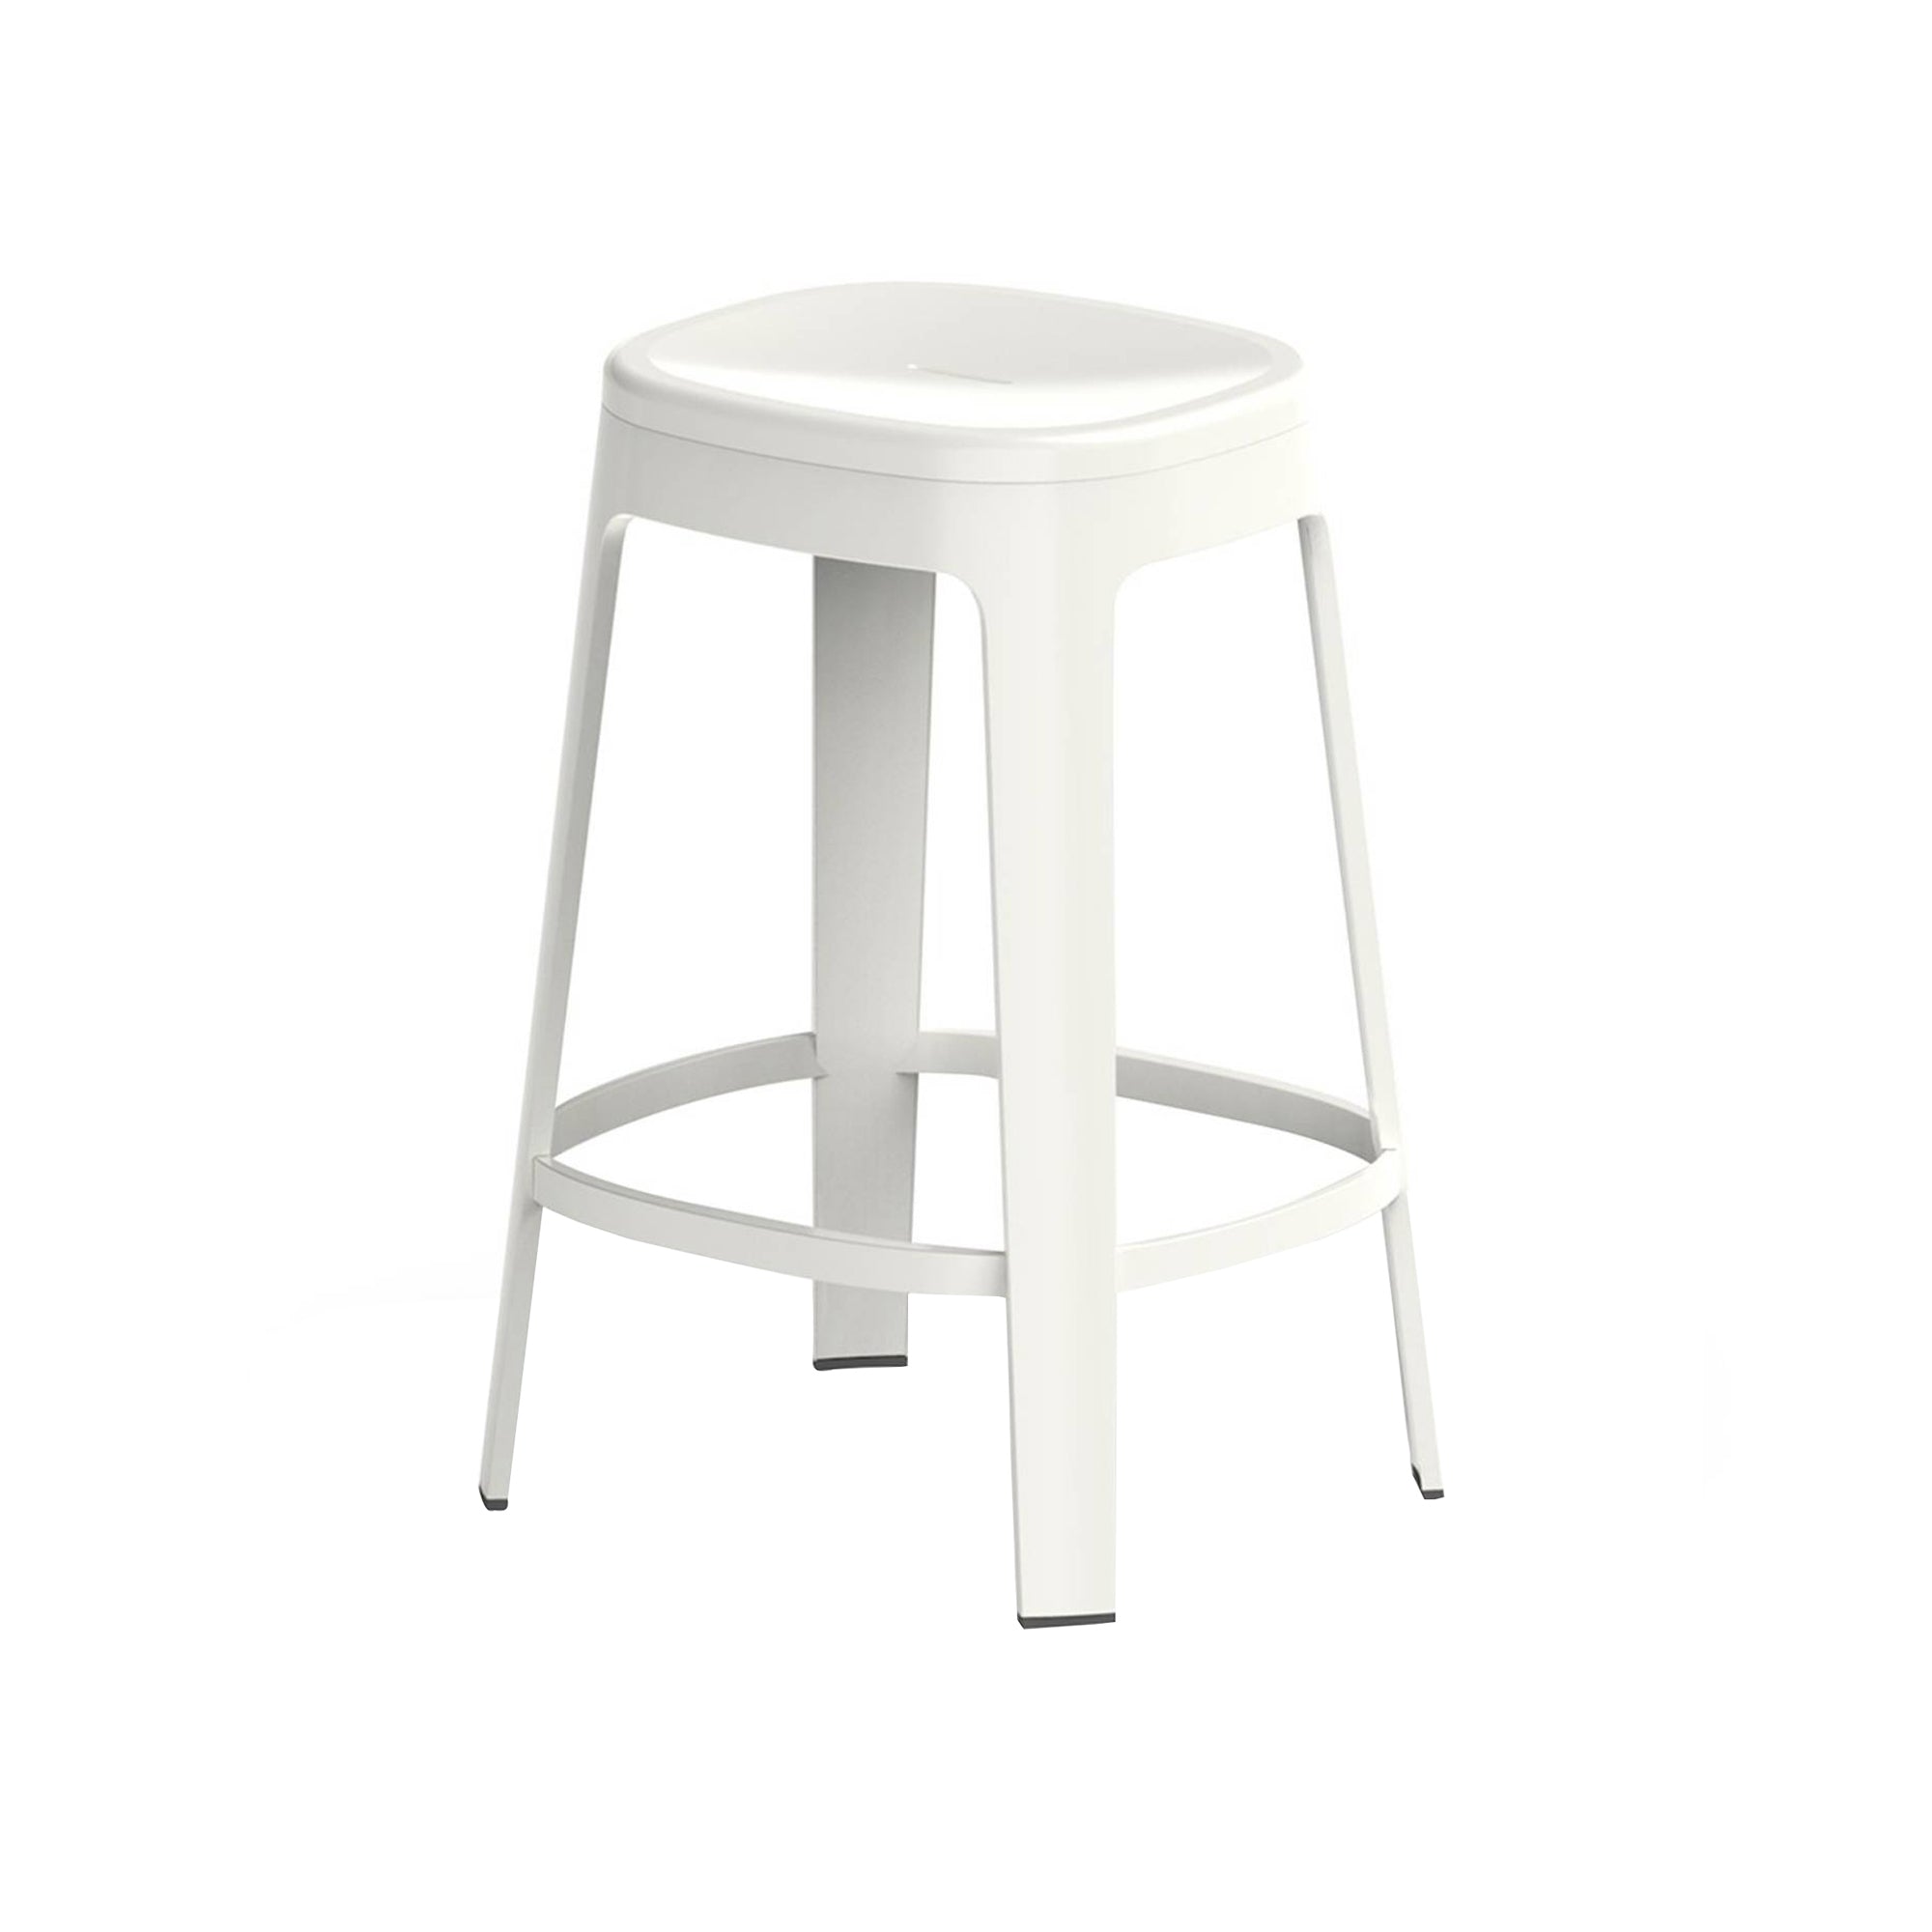 Ombra Bar + Counter Stool: Stacking + Counter + White